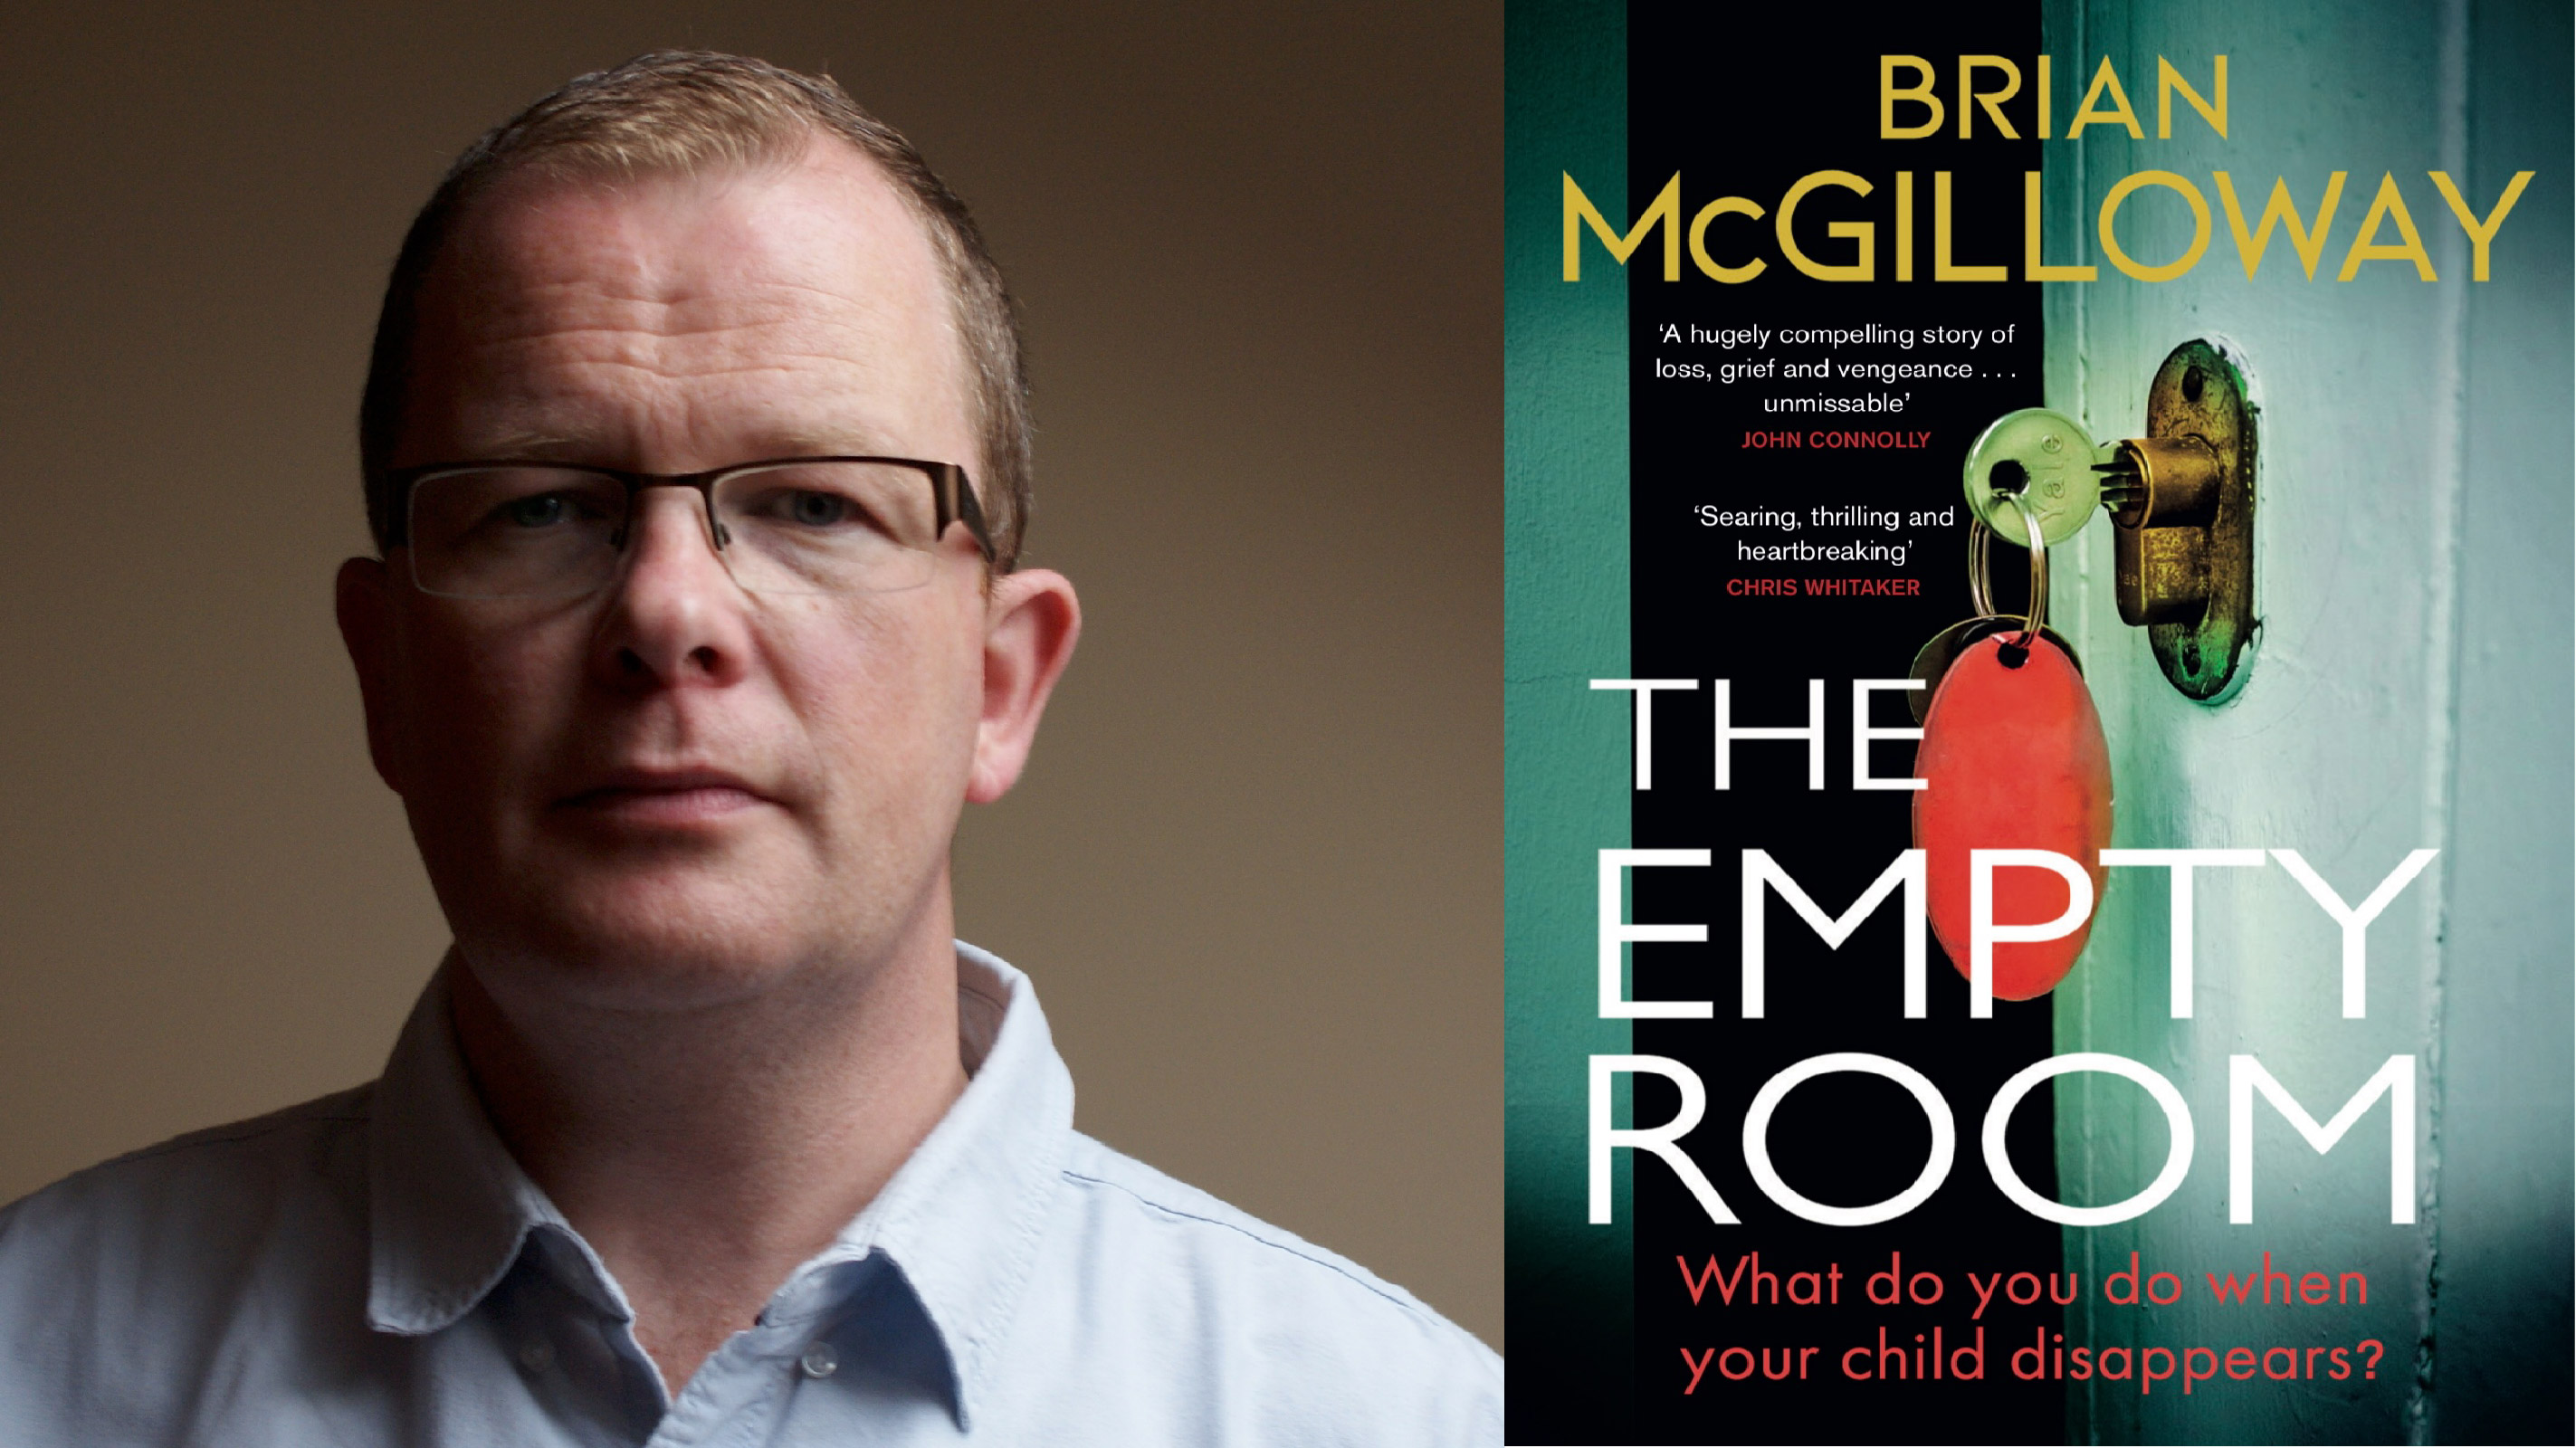 Book Launch with Brian McGilloway - The Empty Room